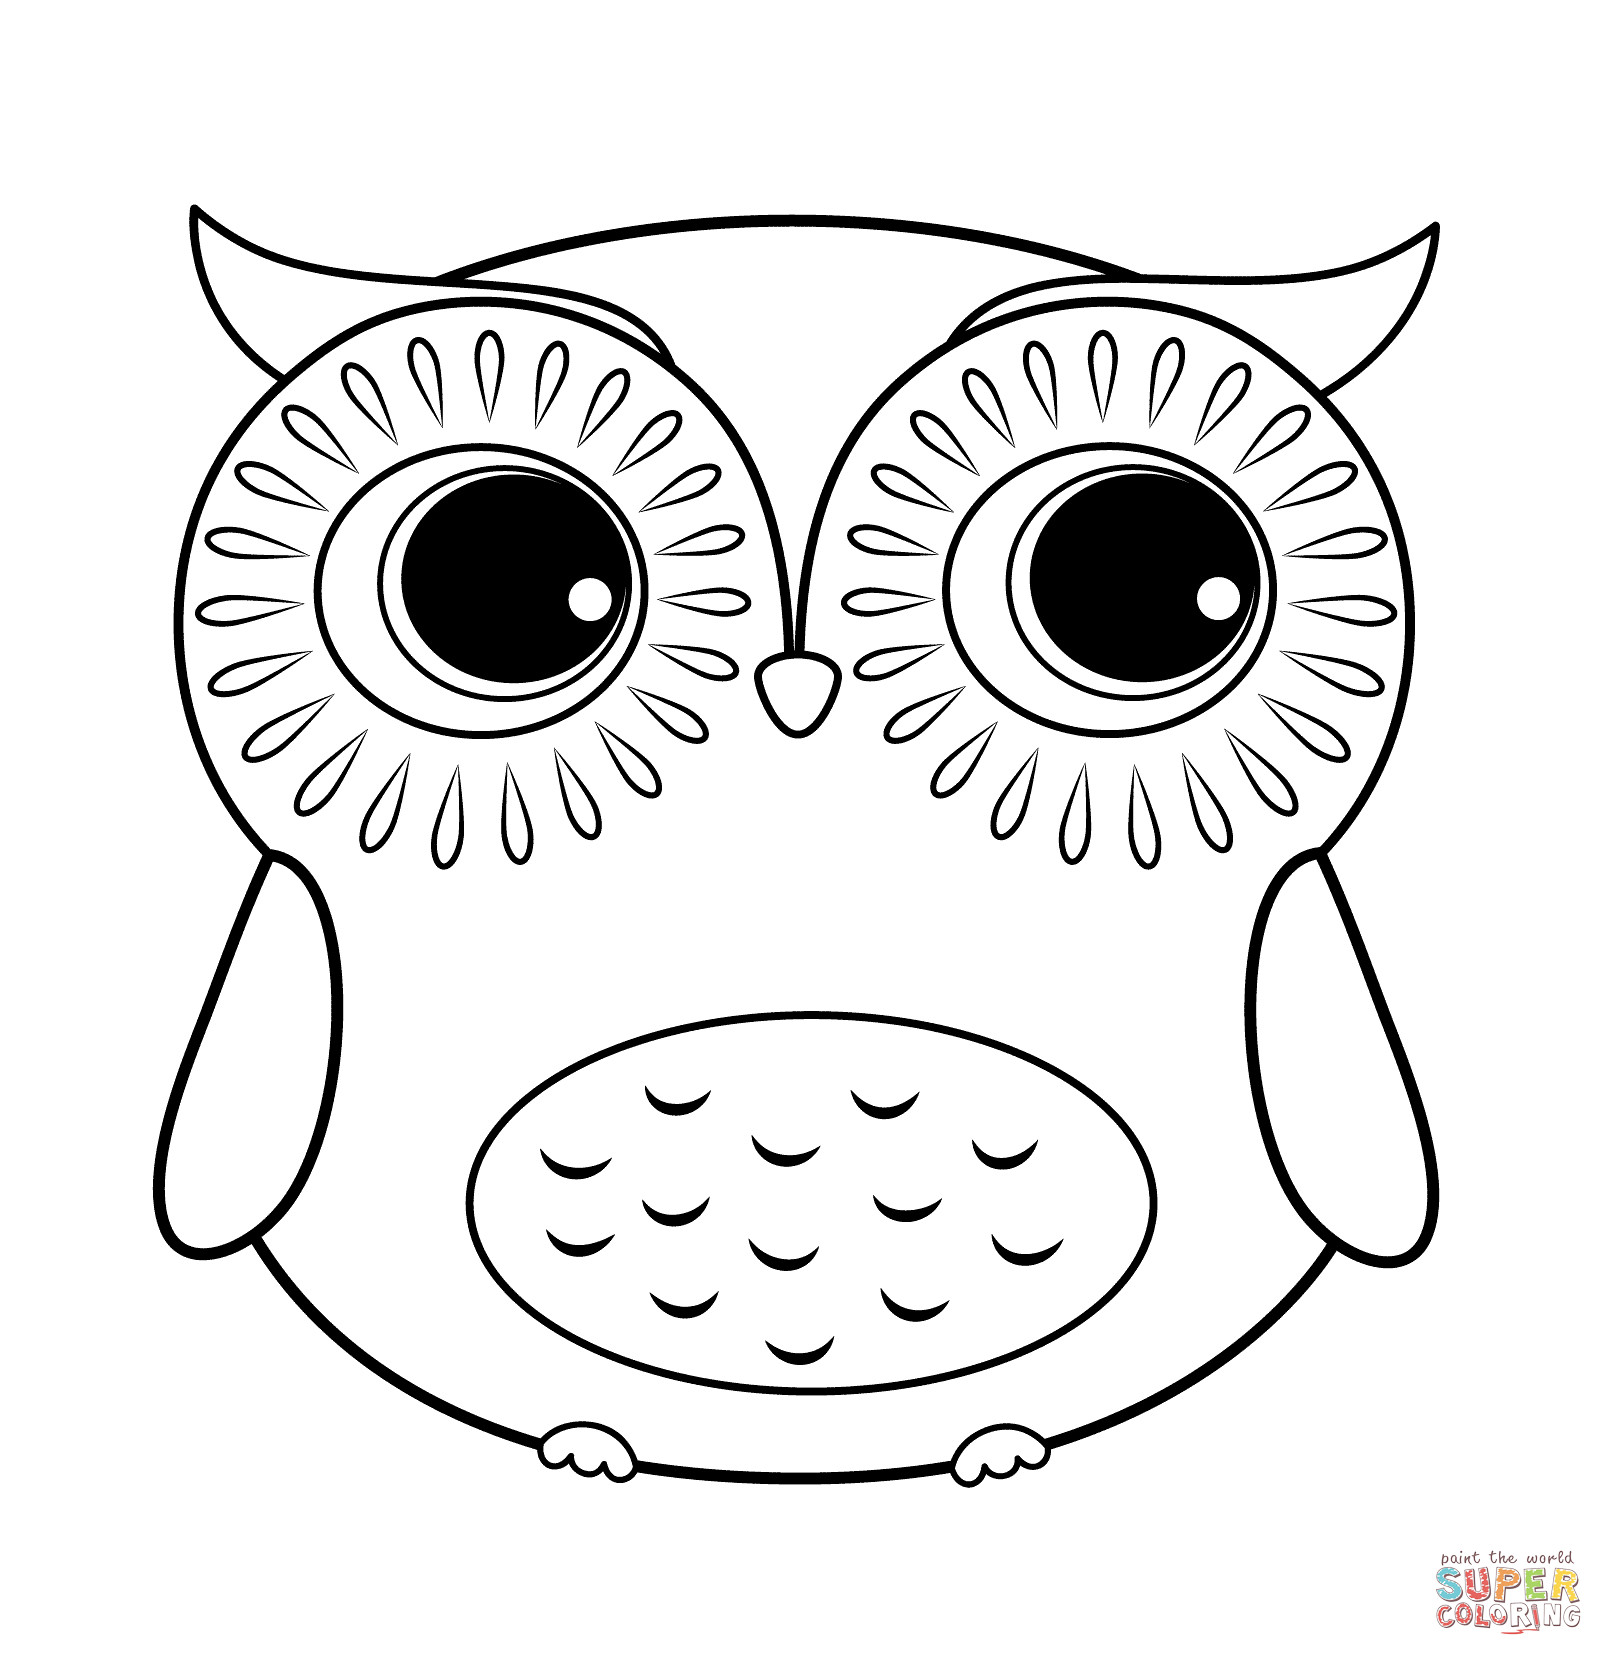 Owl Coloring Pages For Kids
 Cartoon Owl coloring page